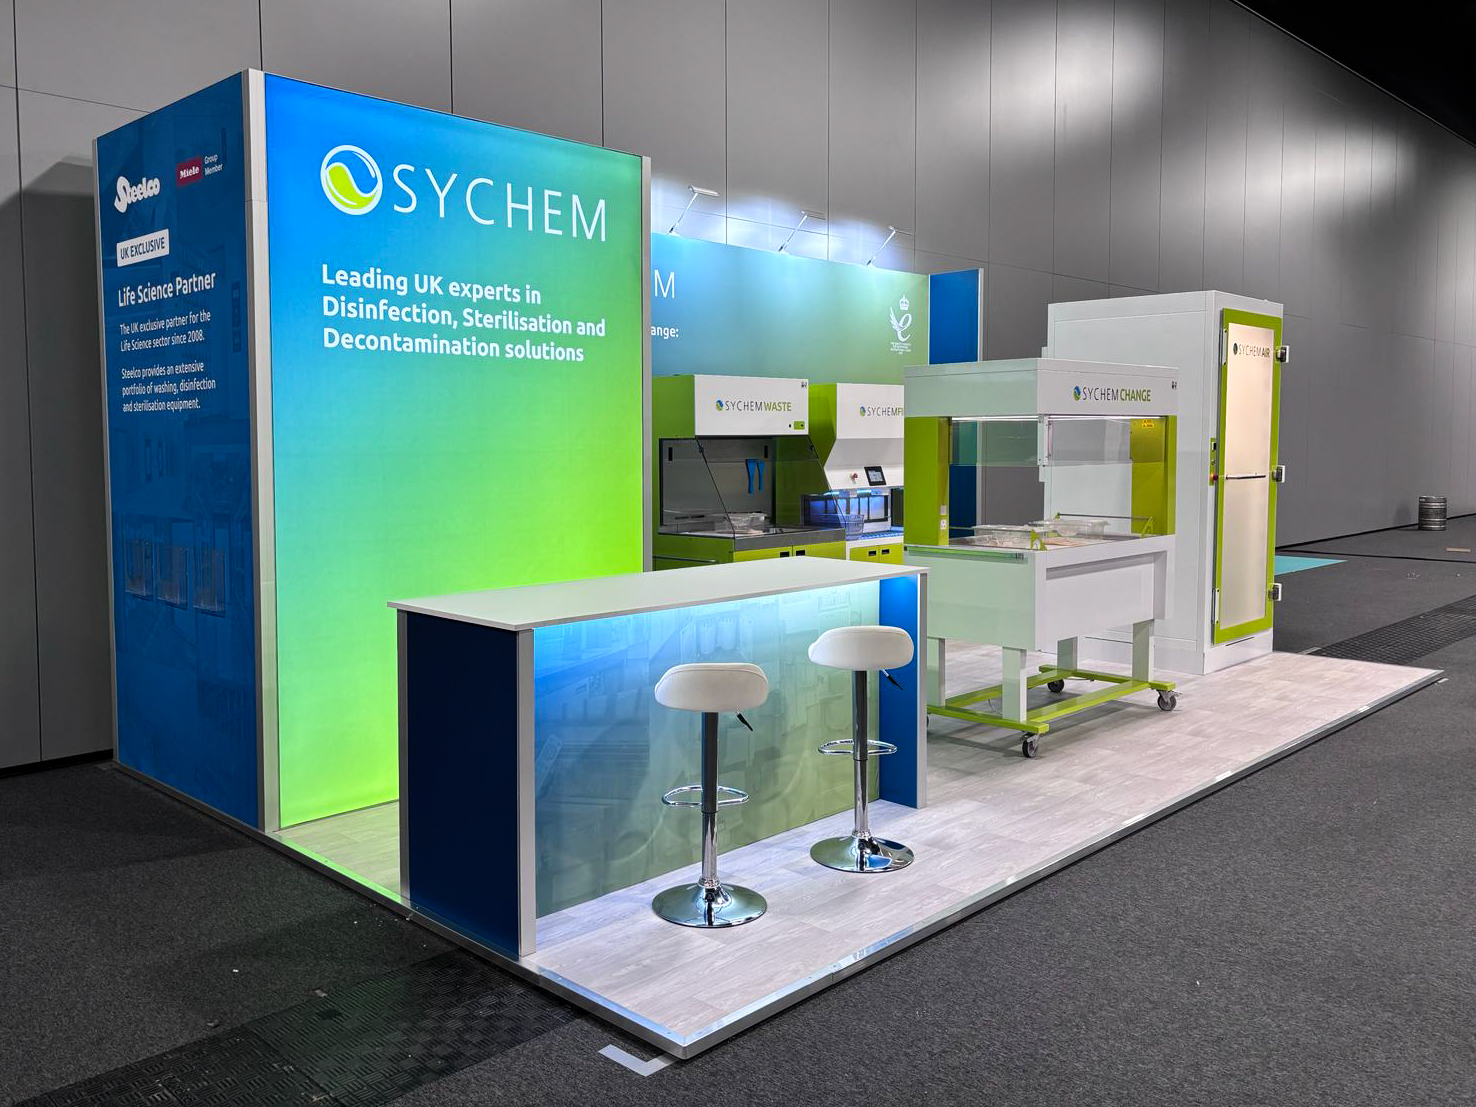 large exhibition stand with blue and green walls at the back. A lit counter with two stools and some chemical equipment are set in front of the rear wall